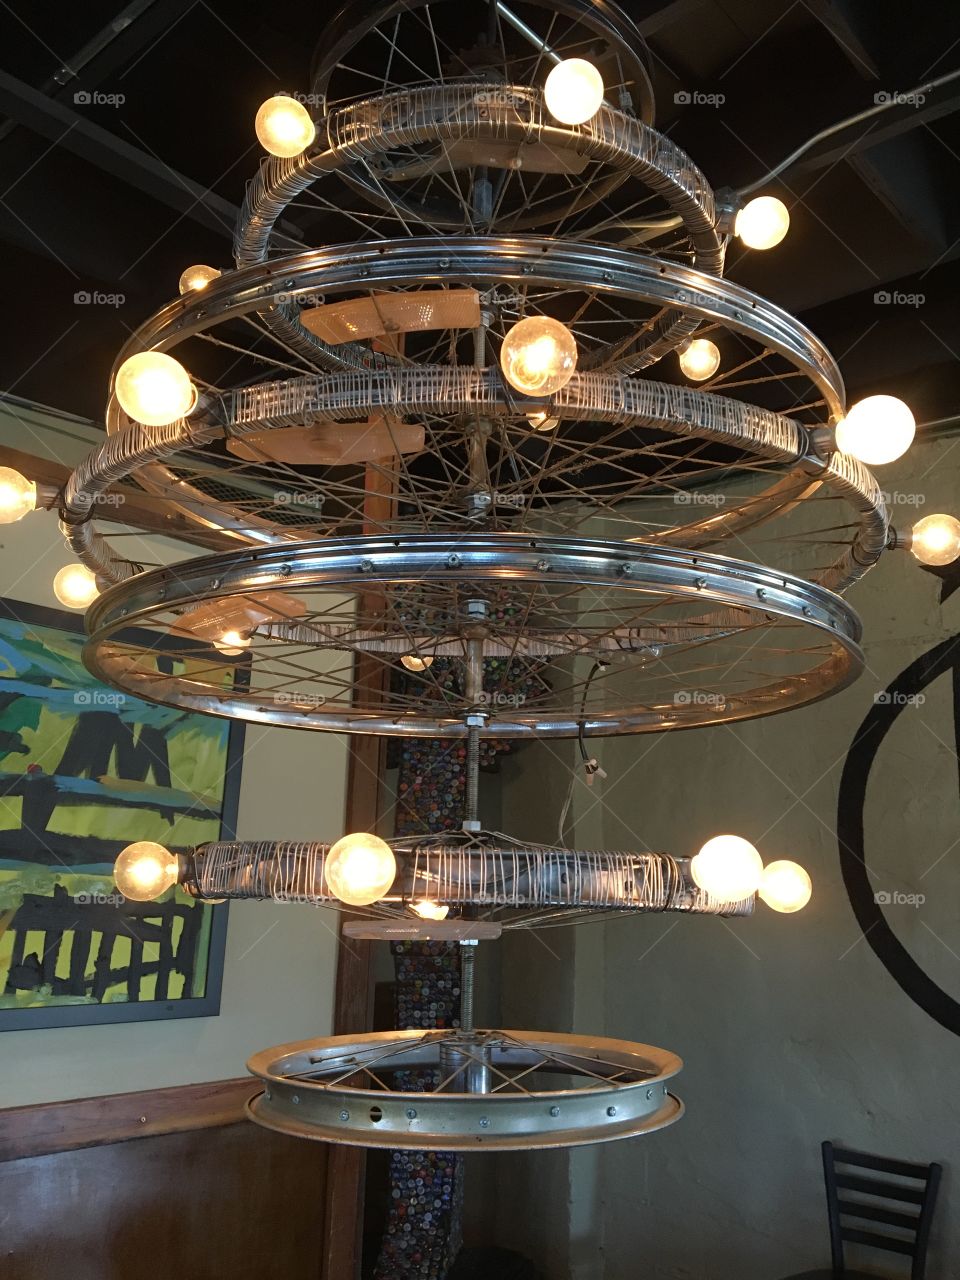 Light made from bicycle rims